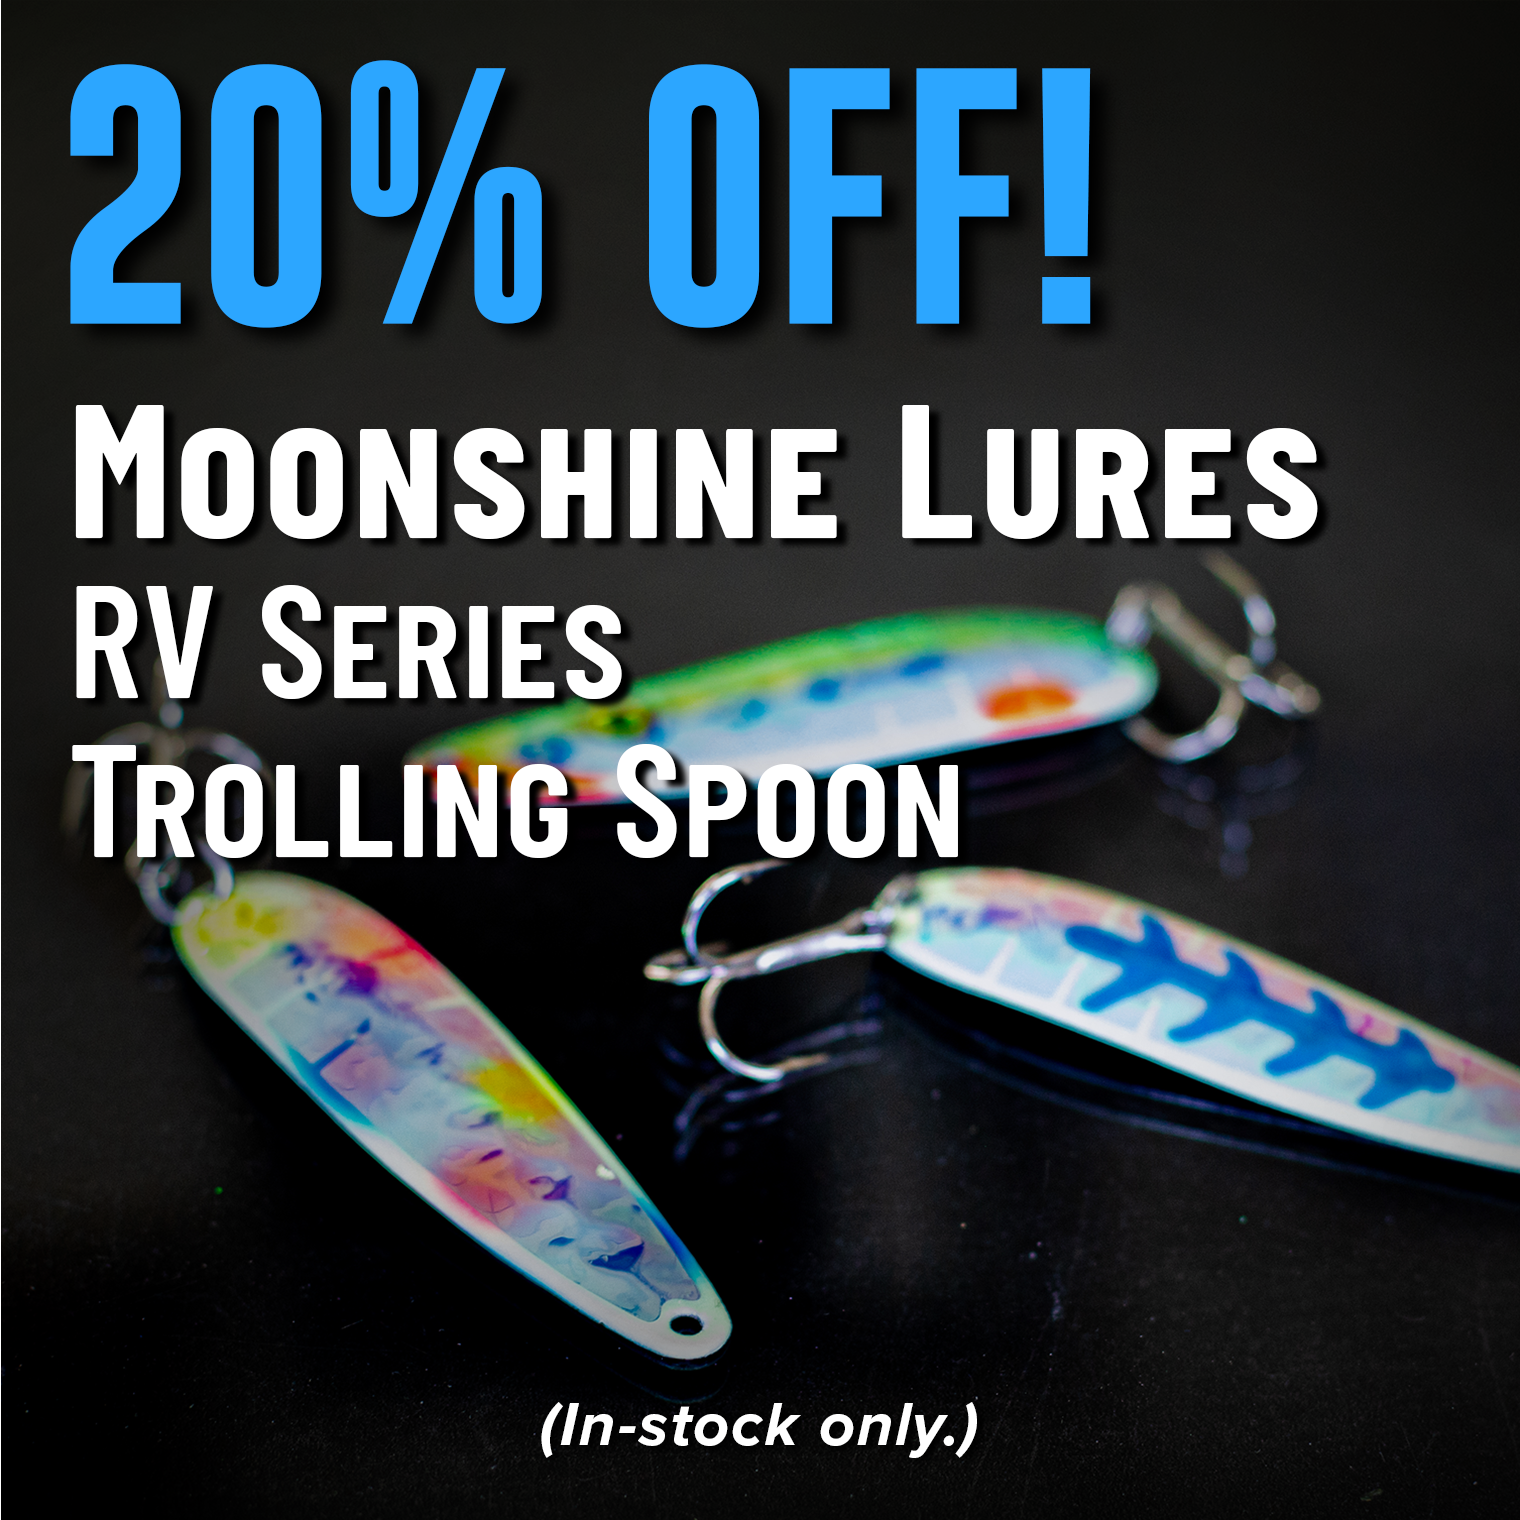 20% Off! Moonshine Lures RV Series Trolling Spoon (In-stock only.)